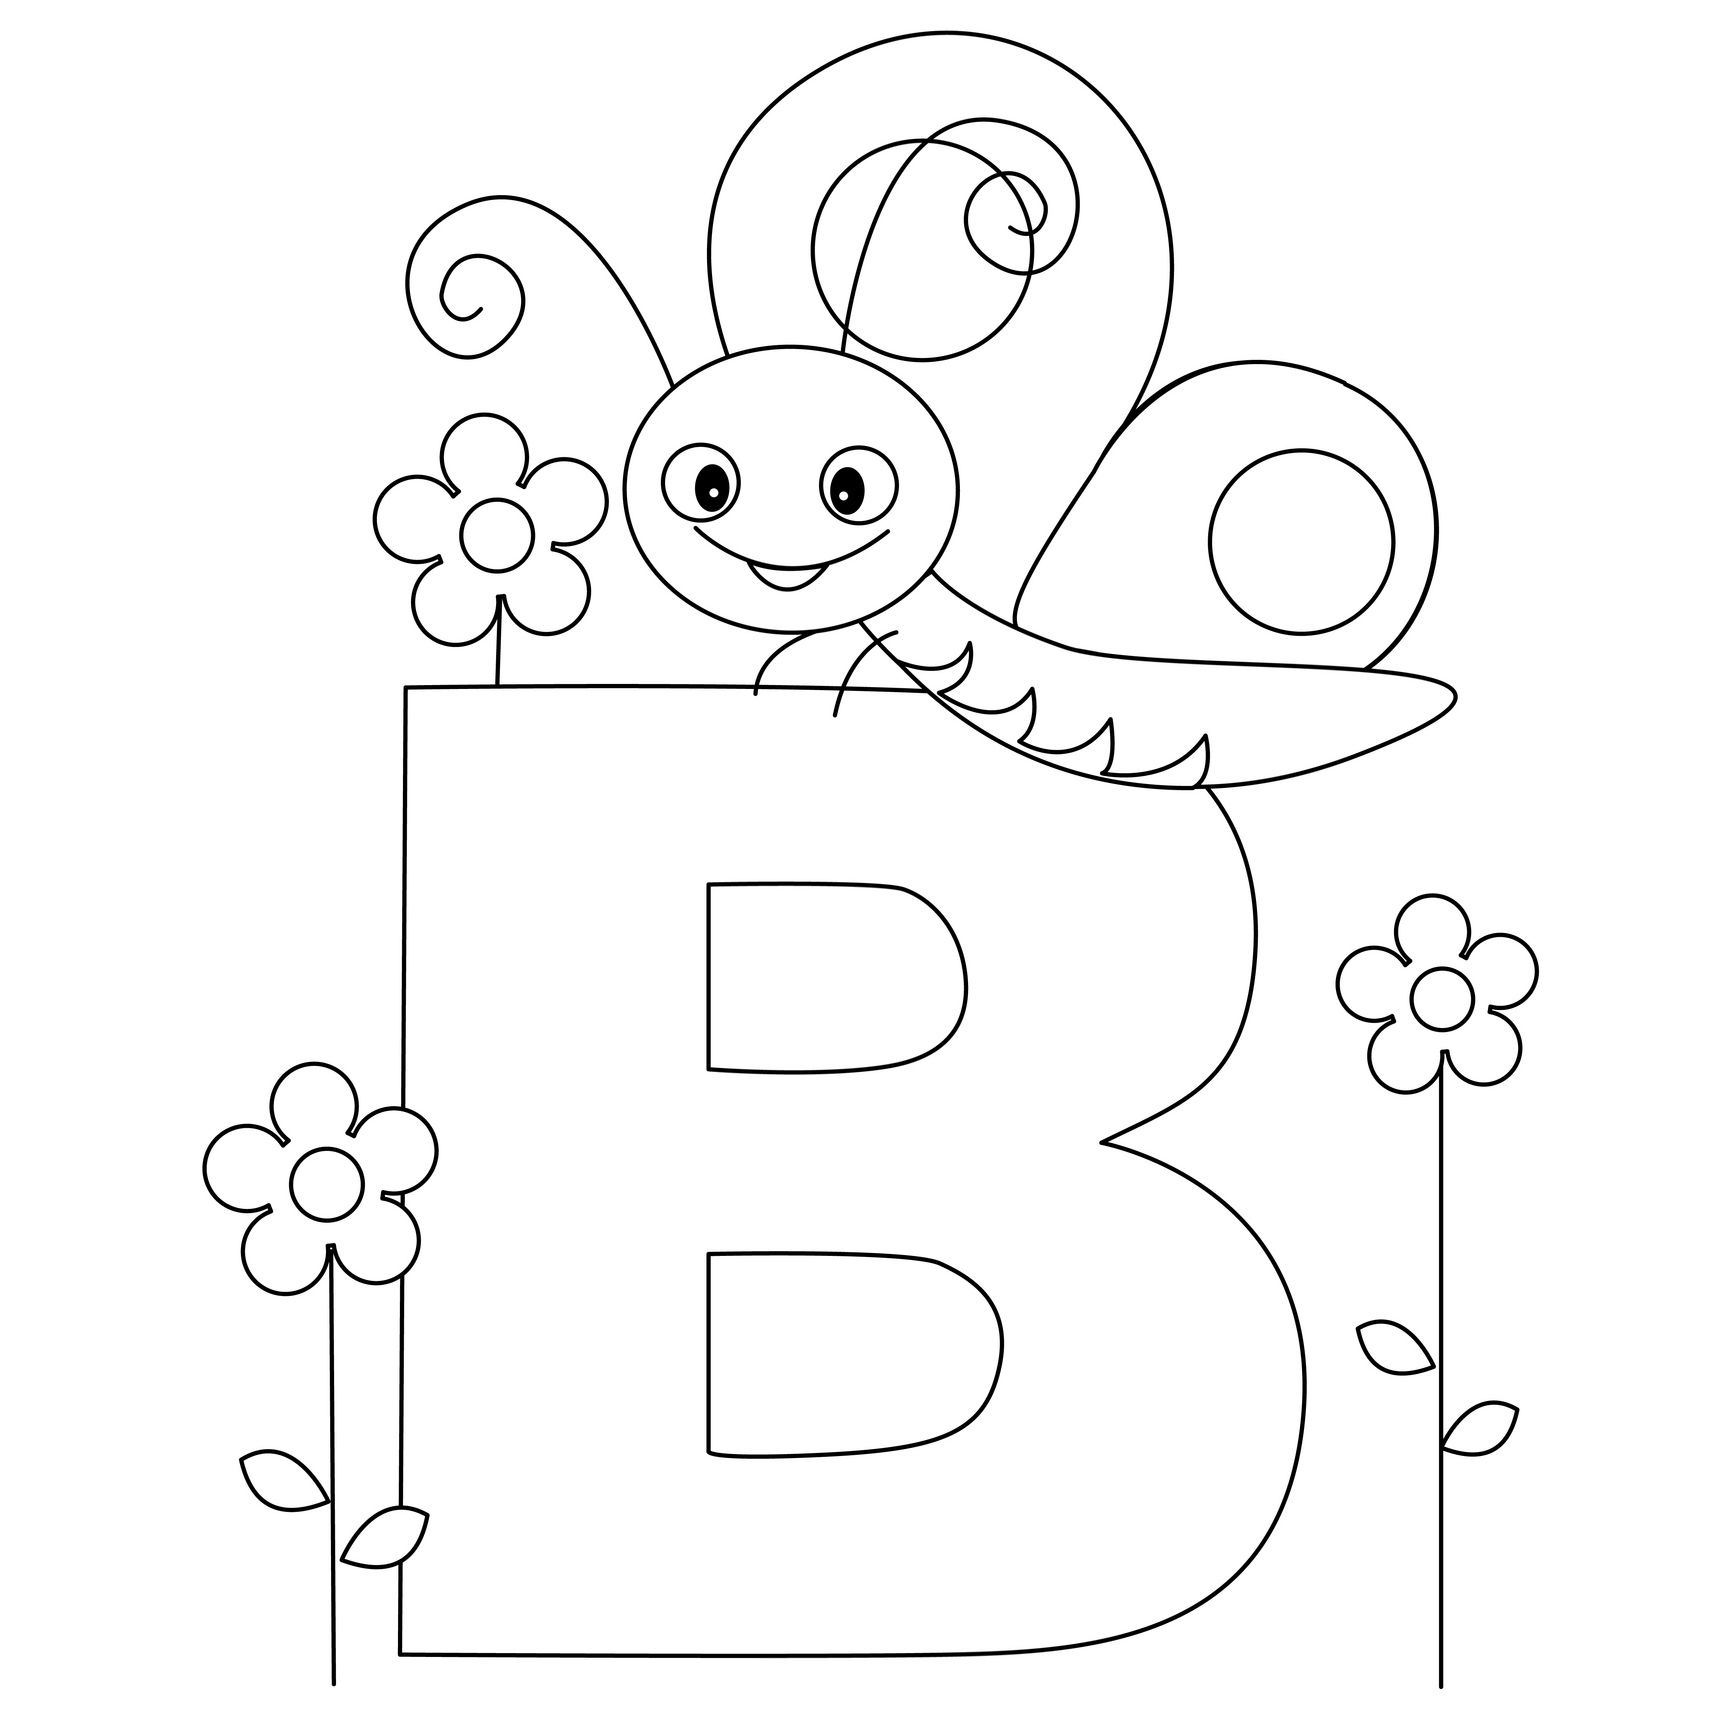 Animal Alphabet Letter B Is For Butterfly! Here&amp;#039;s A Simple | Bugs - Free Printable Animal Alphabet Letters